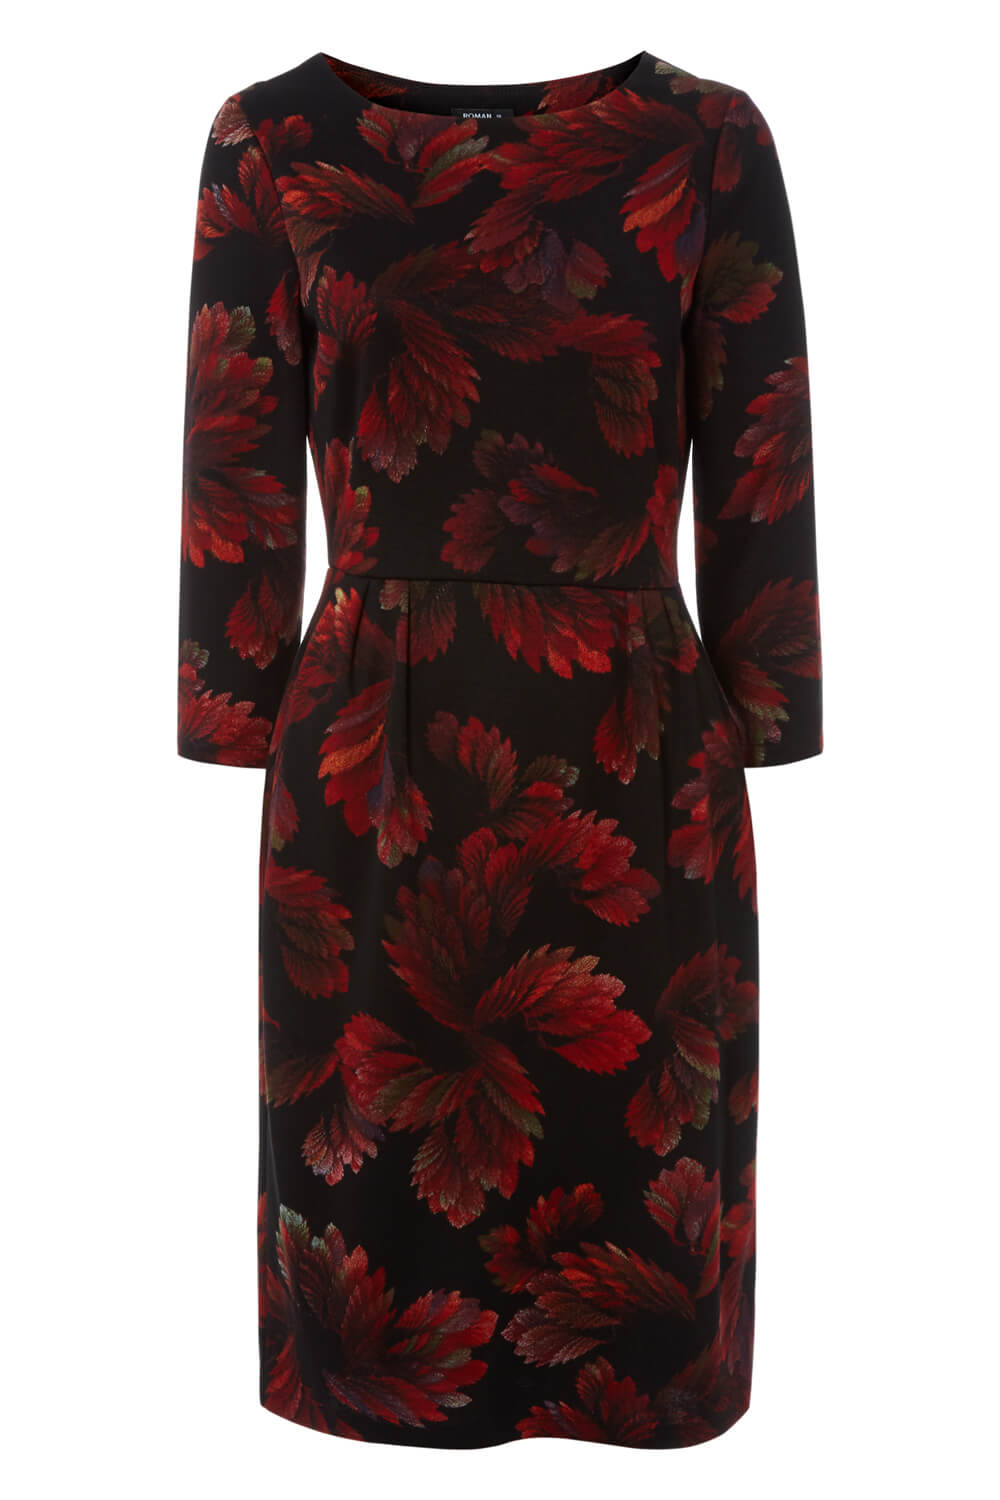 Red Floral Dress with Pockets, Image 5 of 5